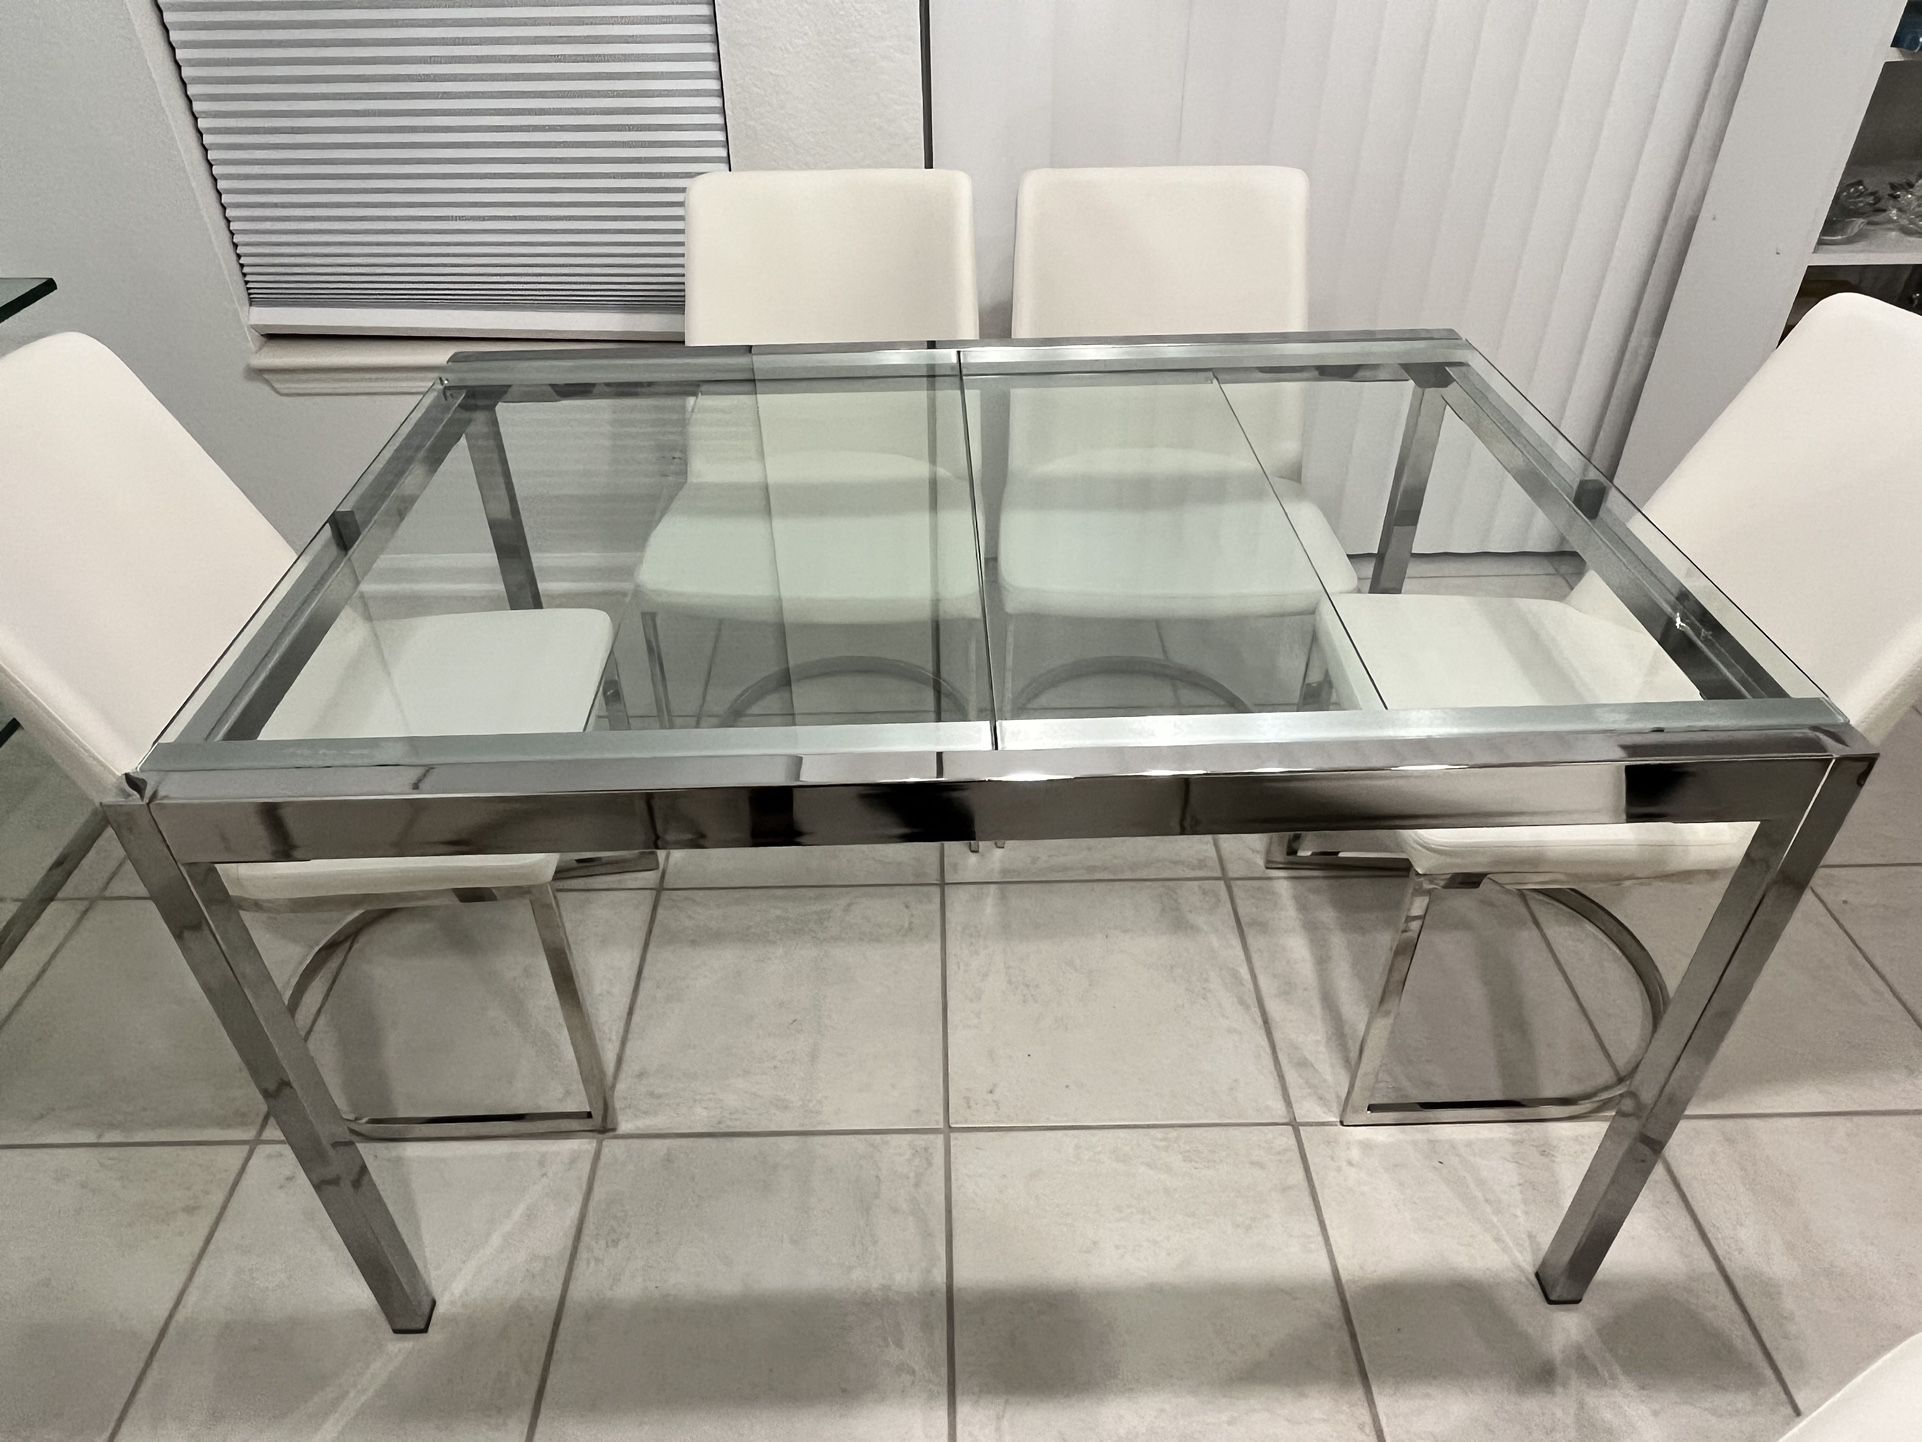 SALE‼️ $600.00 How beautiful is this Chrome Chanel dining room